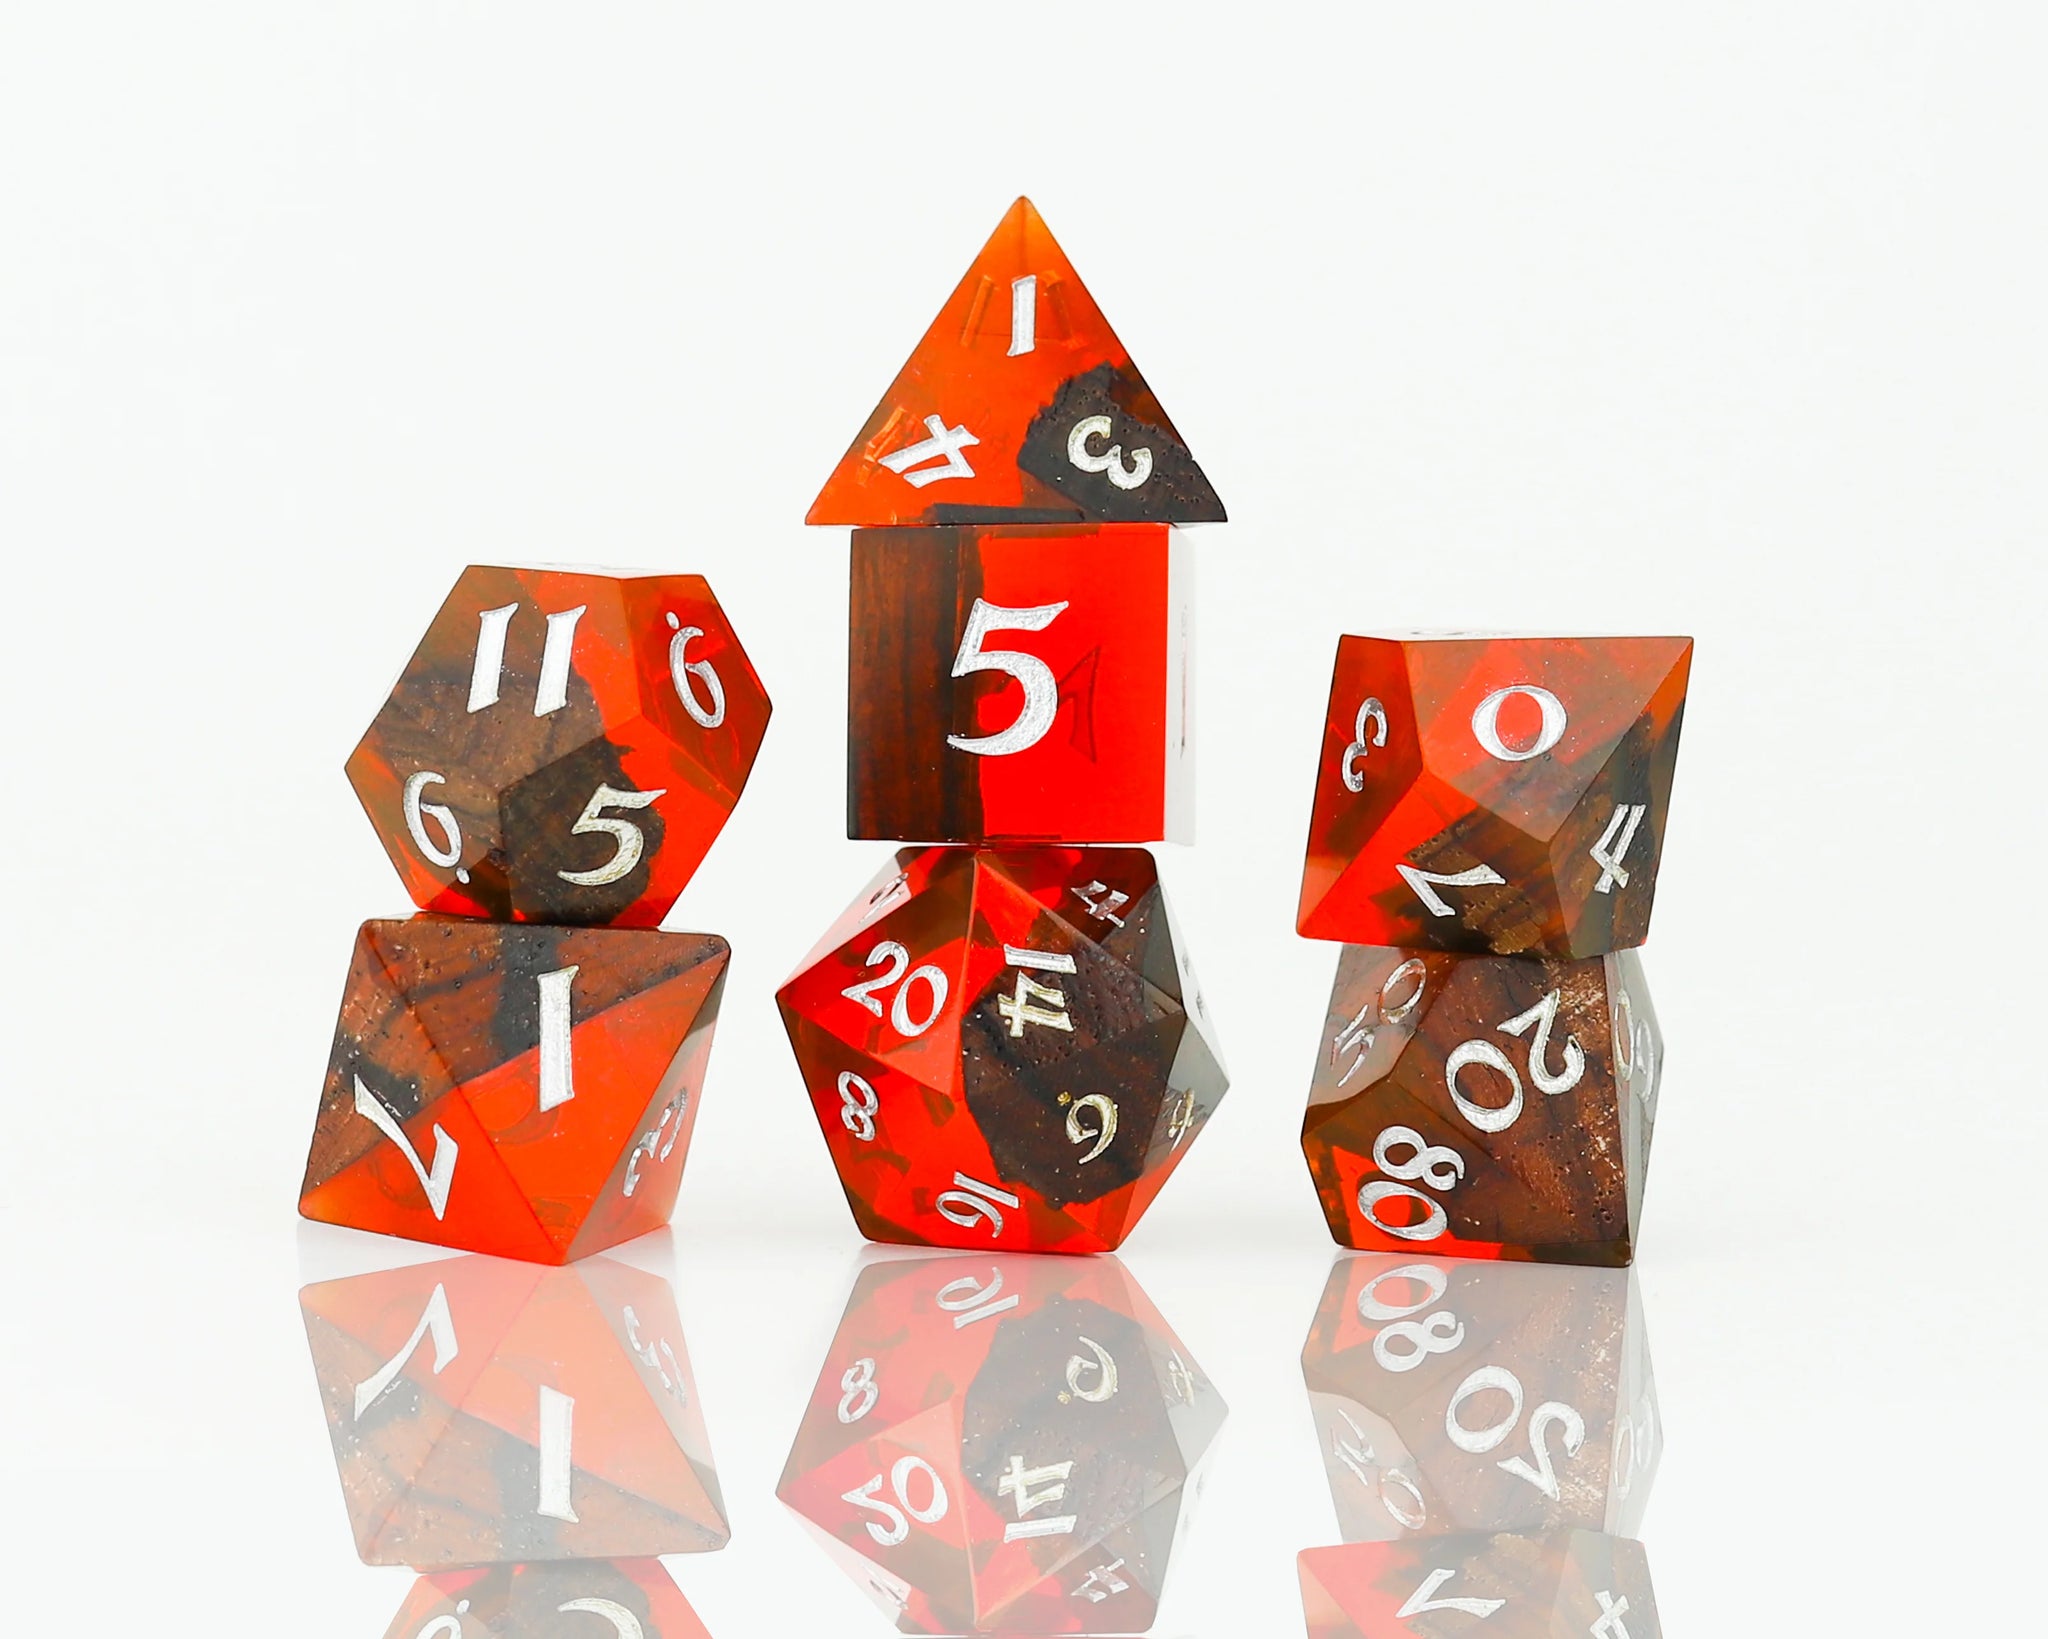 100+ Pack of Random D4 Polyhedral Dice in Multiple Colors